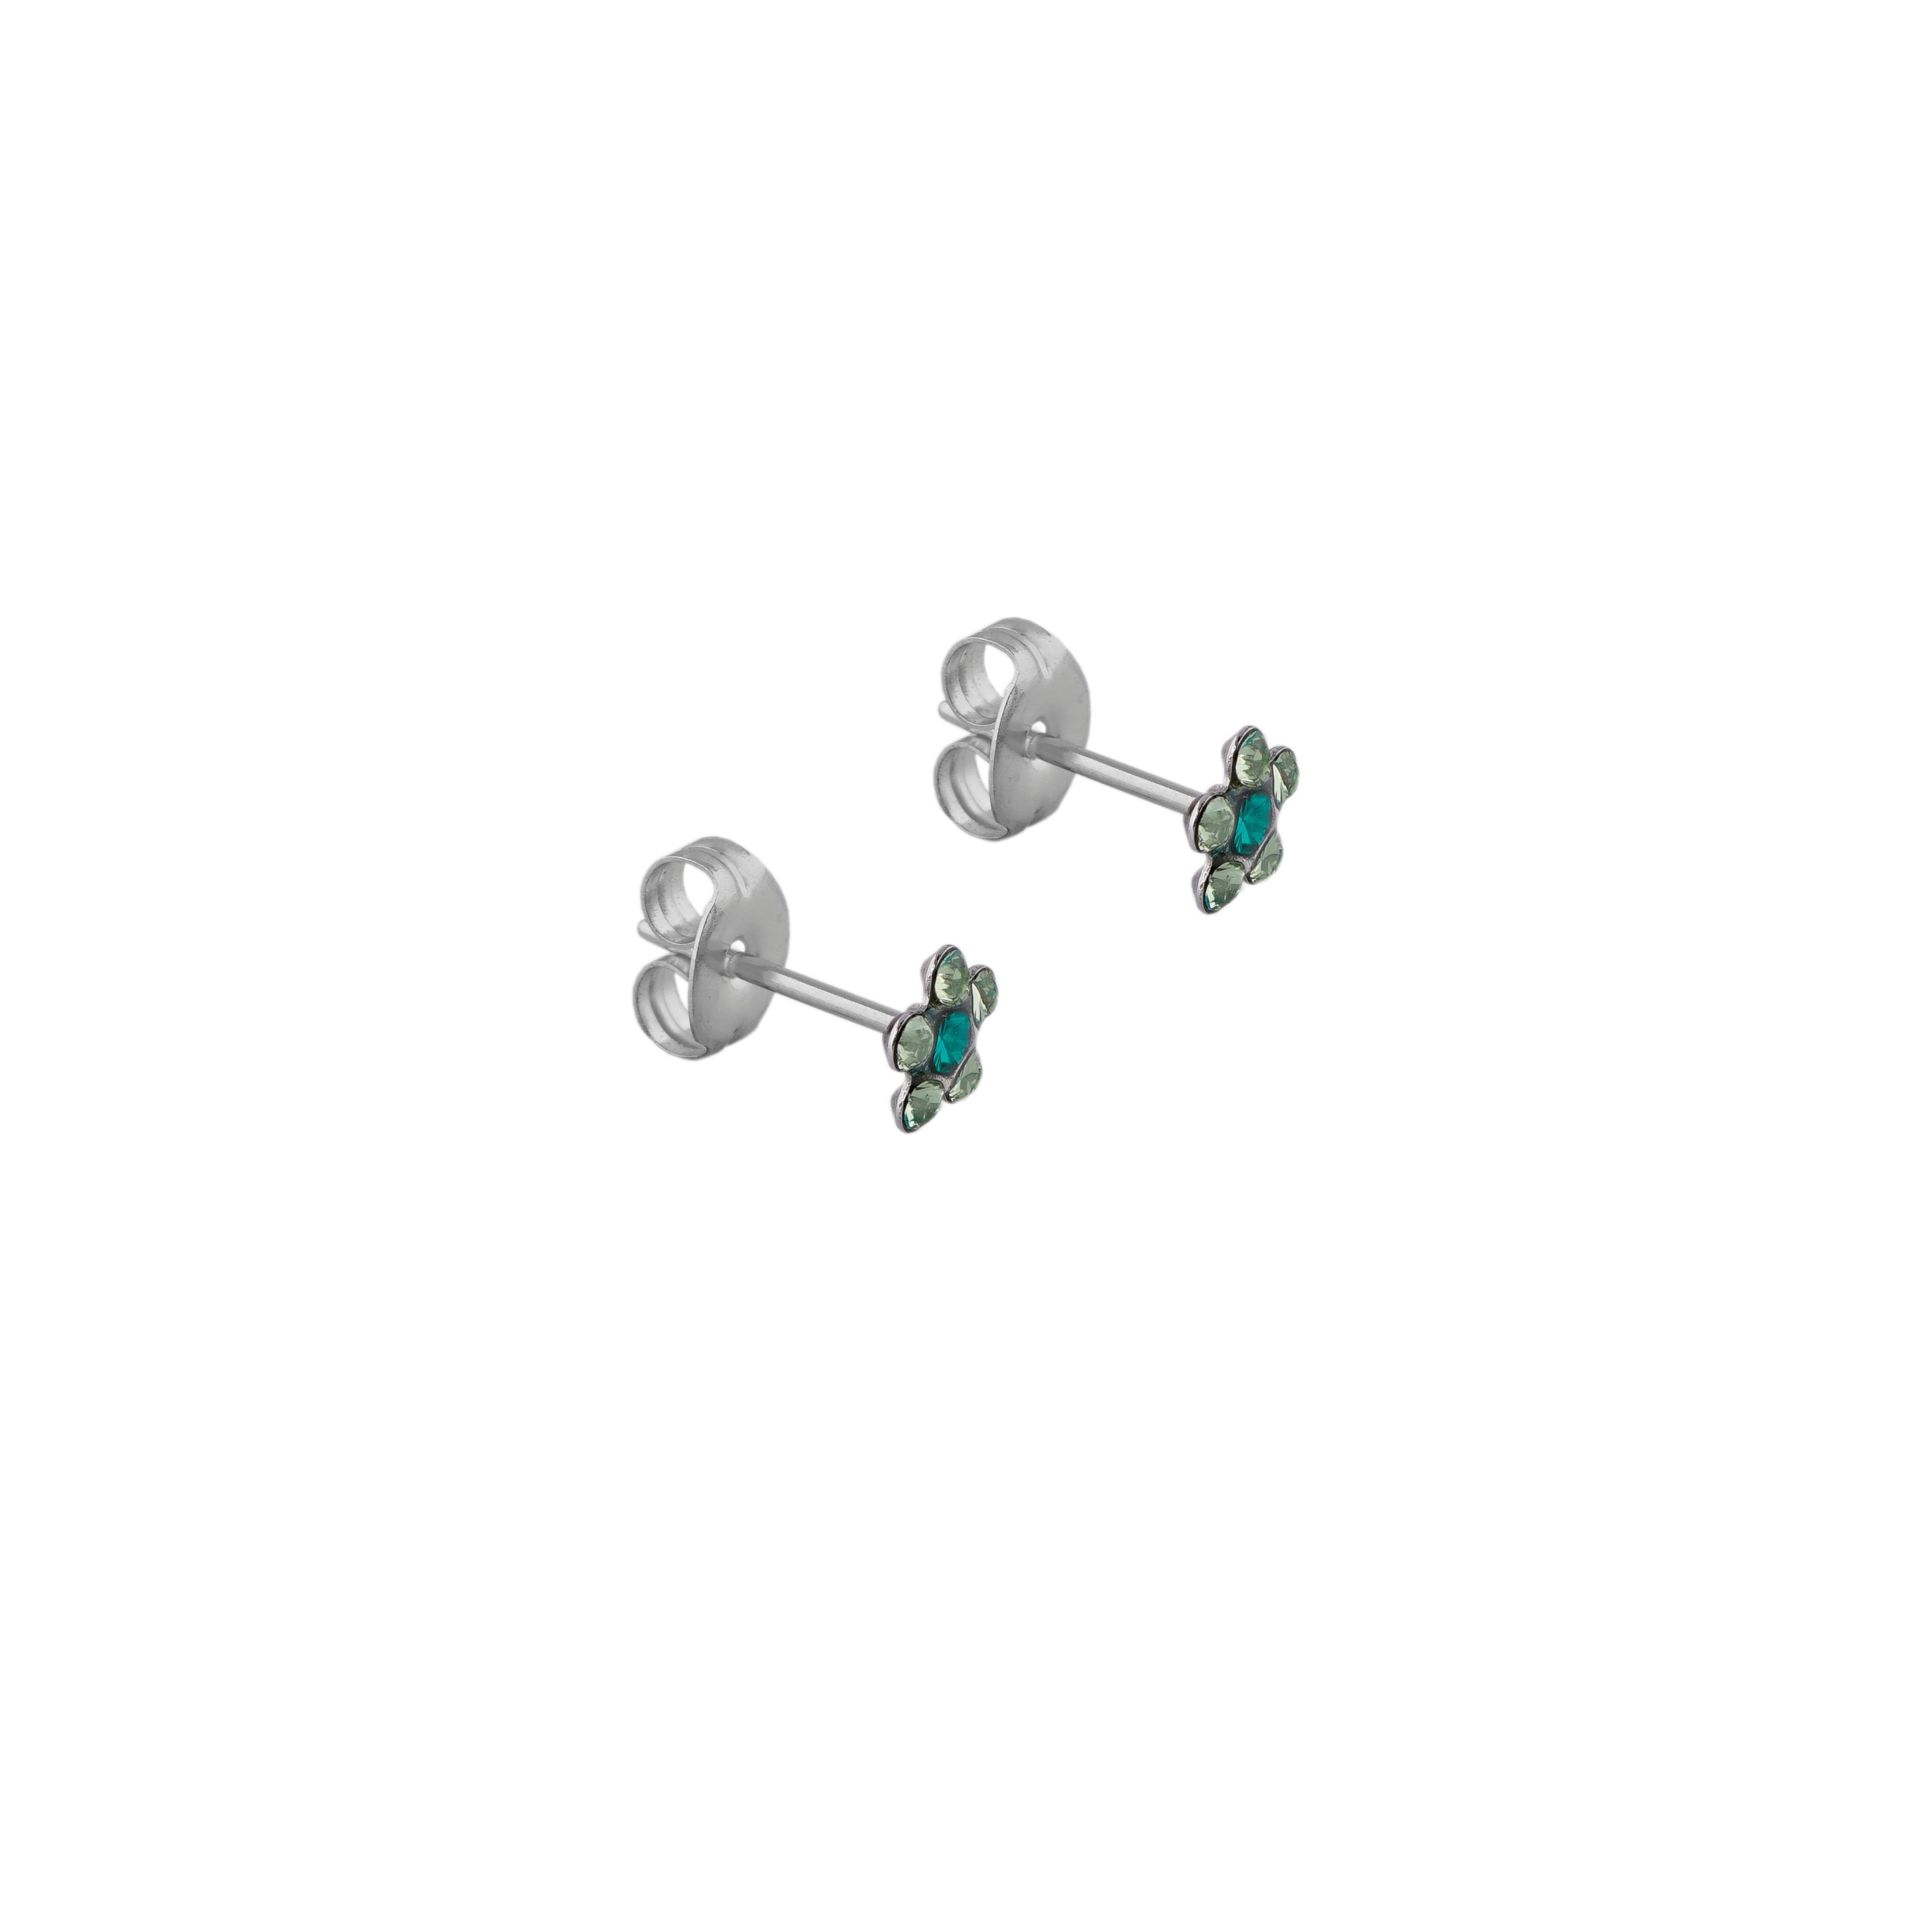 Daisy August Peridot Ð May Emerald Allergy free Stainless Steel Ear Studs For Kids